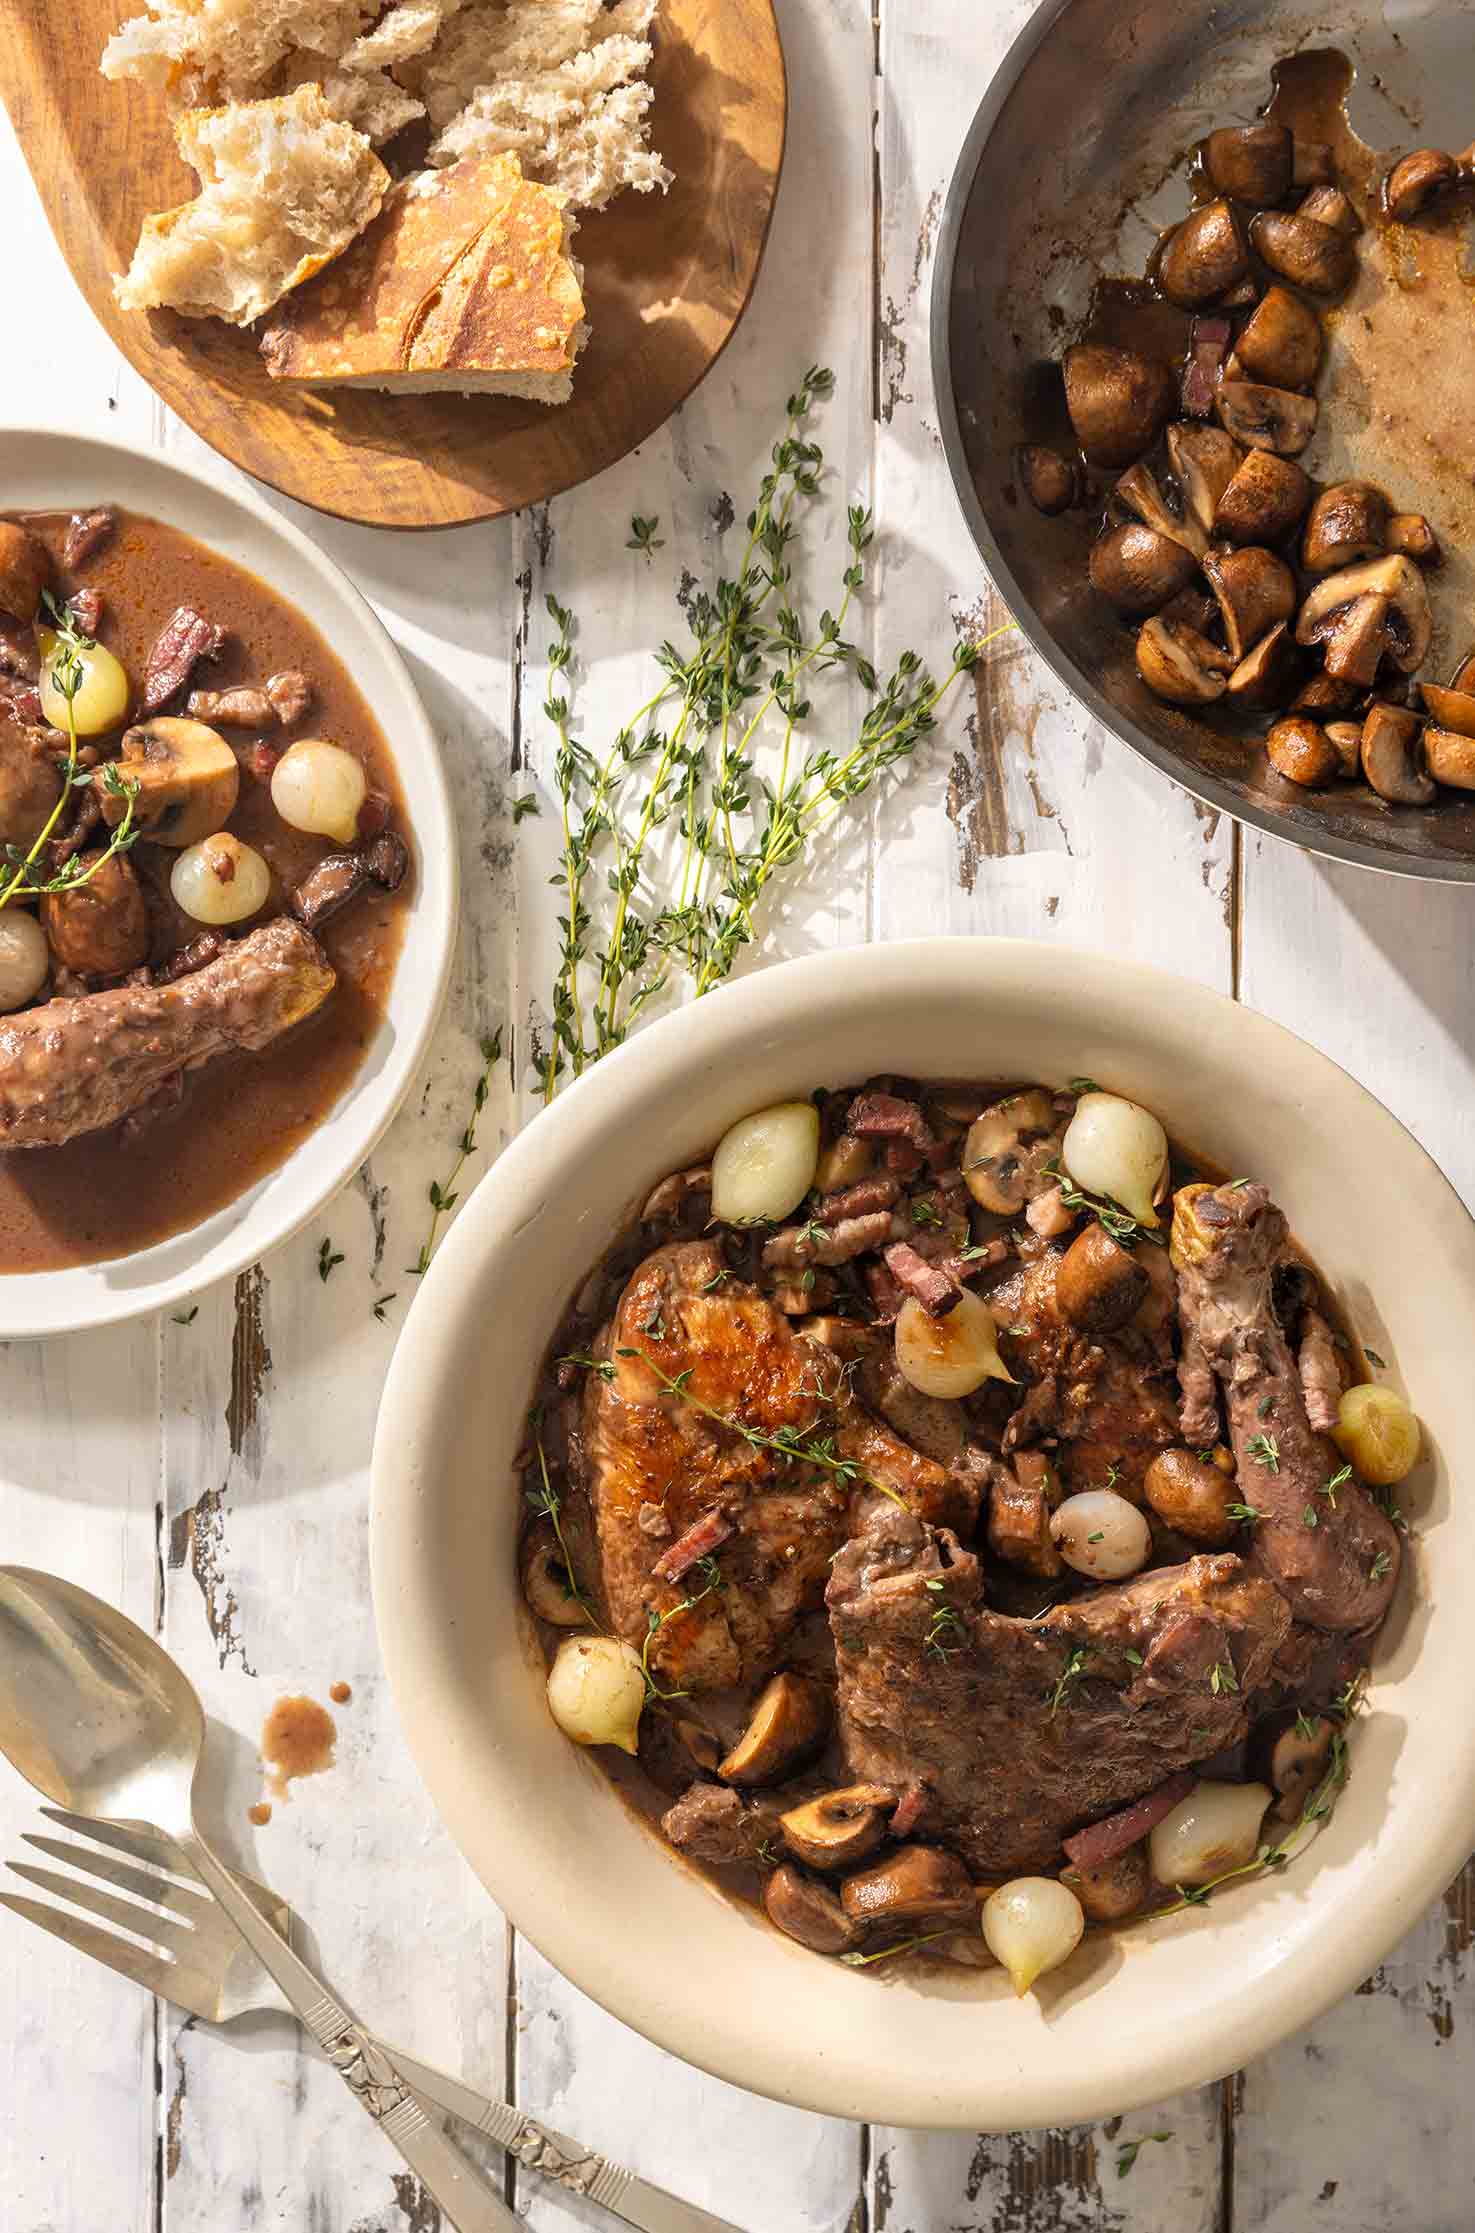 Two bowls of coq au vin on a table with sliced bread, sautéed mushrooms, and fresh herbs.